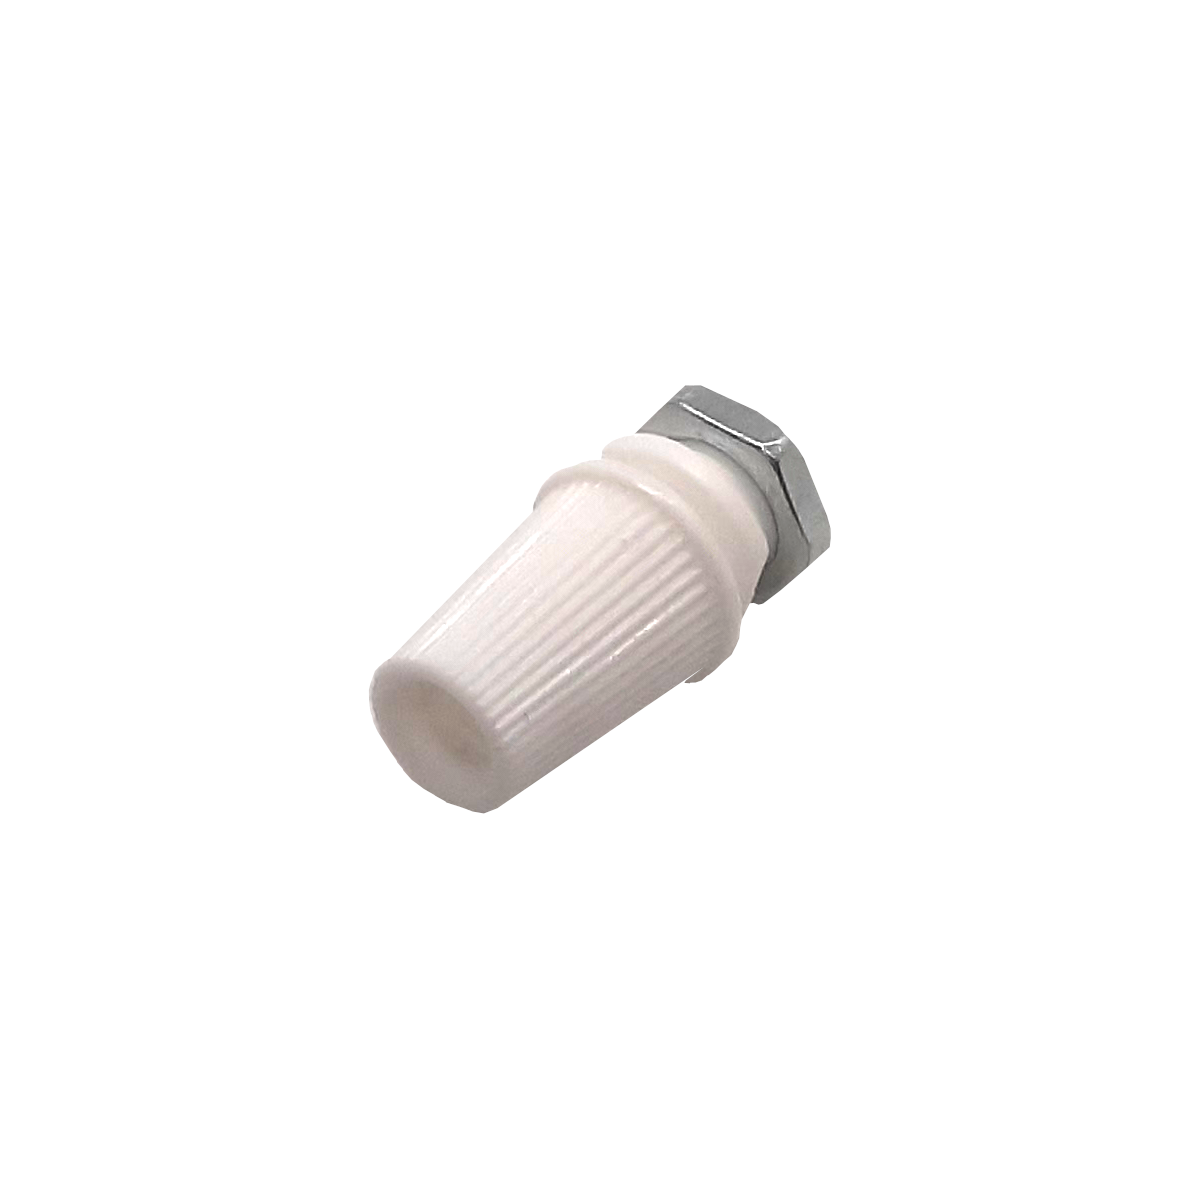 Product image of SG020 White Plastic Cord Grip